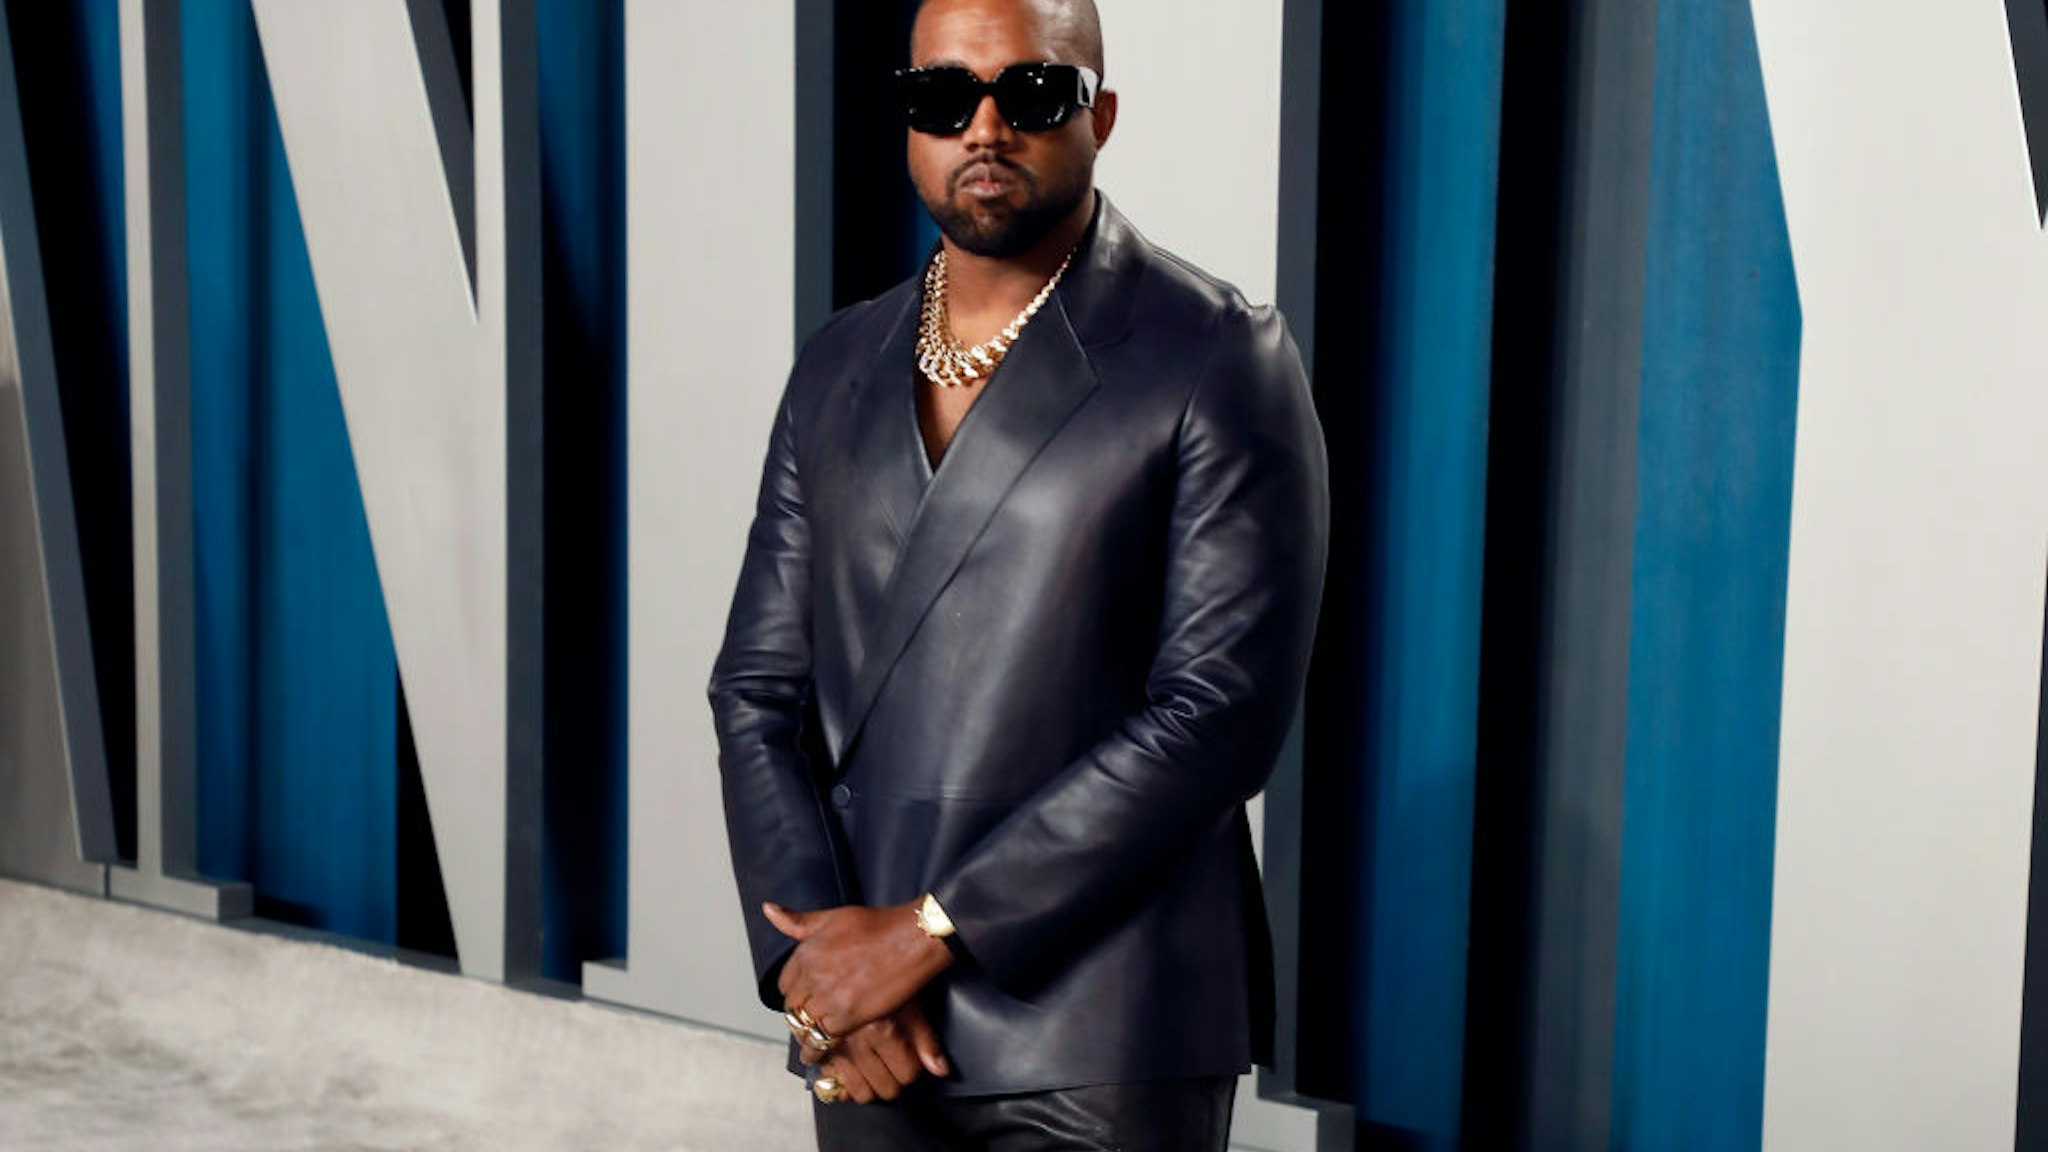 Kanye West attends the 2020 Vanity Fair Oscar Party at Wallis Annenberg Center for the Performing Arts on February 09, 2020 in Beverly Hills, California.